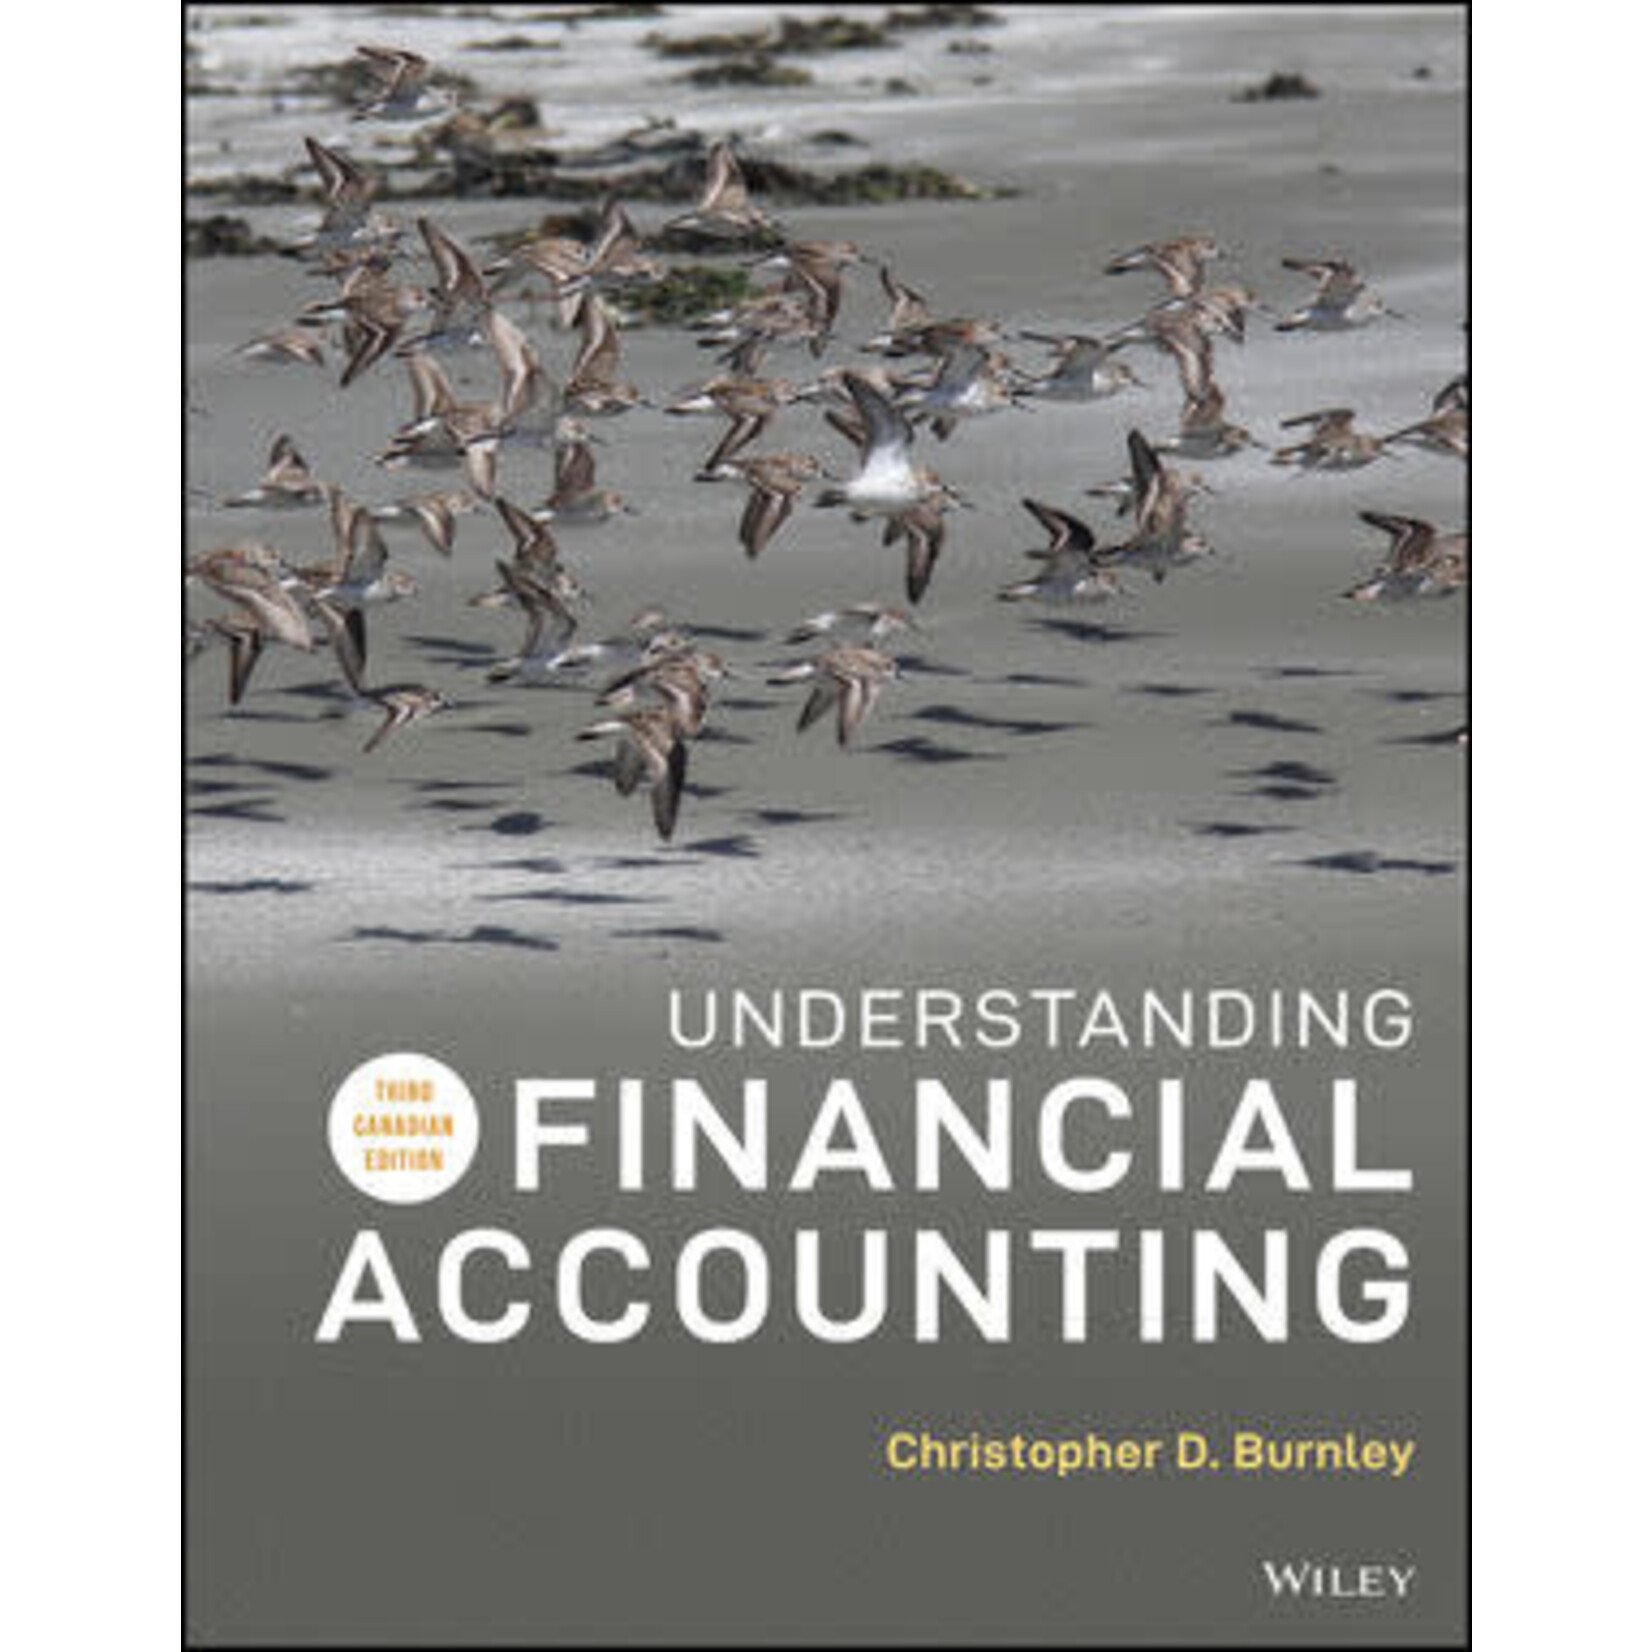 Understanding Financial Accounting, 3rd Edition with WileyPlus (Looseleaf)